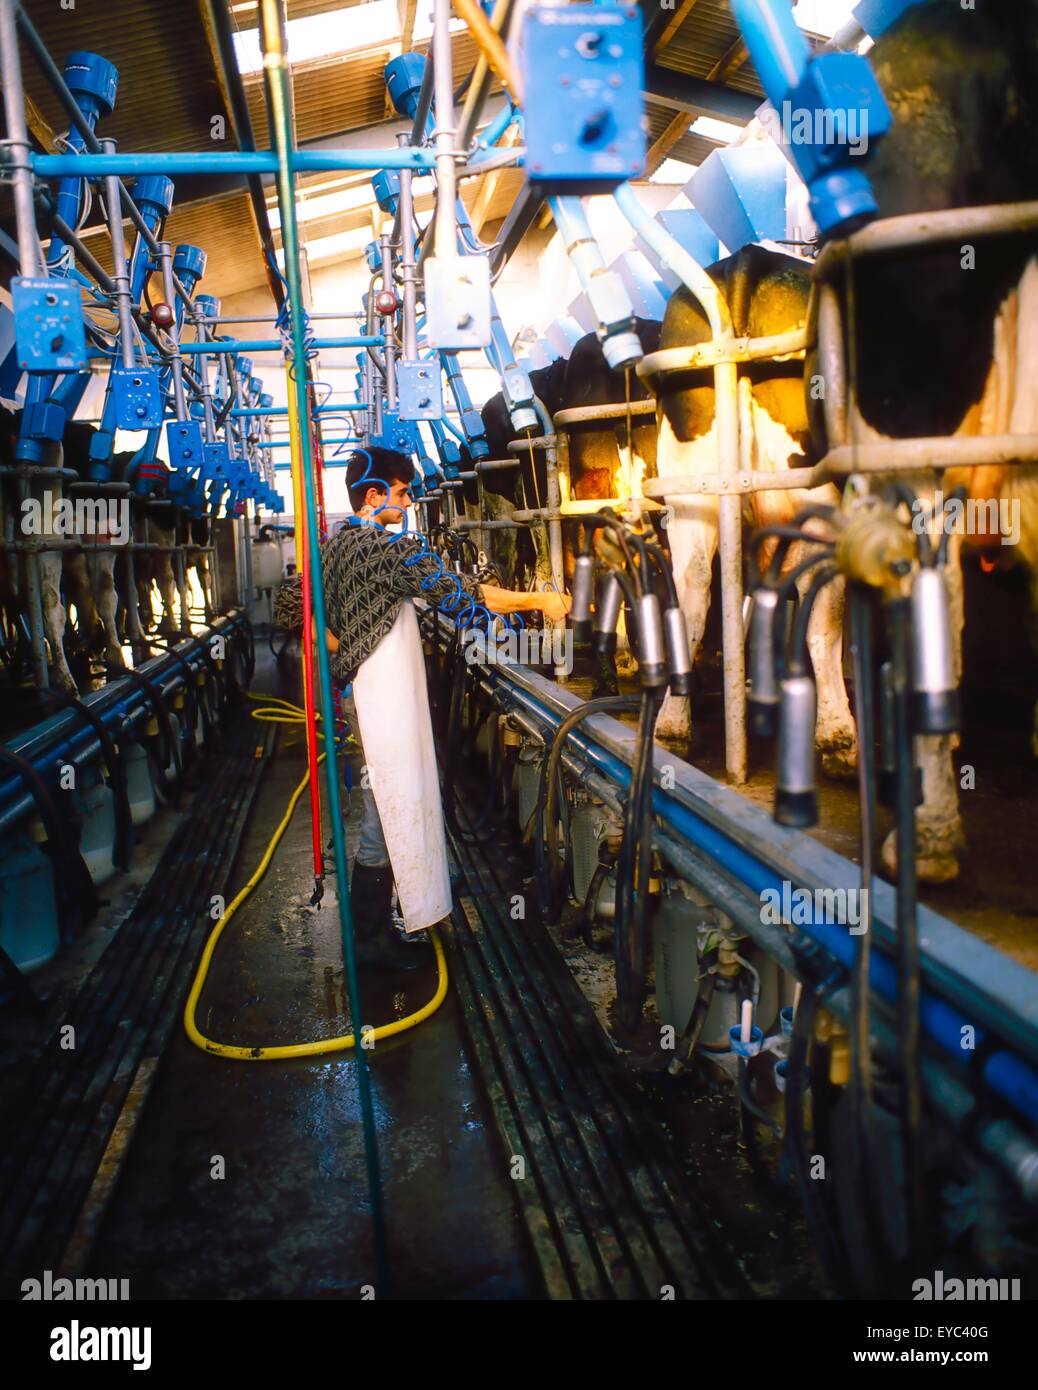 Young Man Milking Cows In Milking Shed; Dairy Production Stock Photo